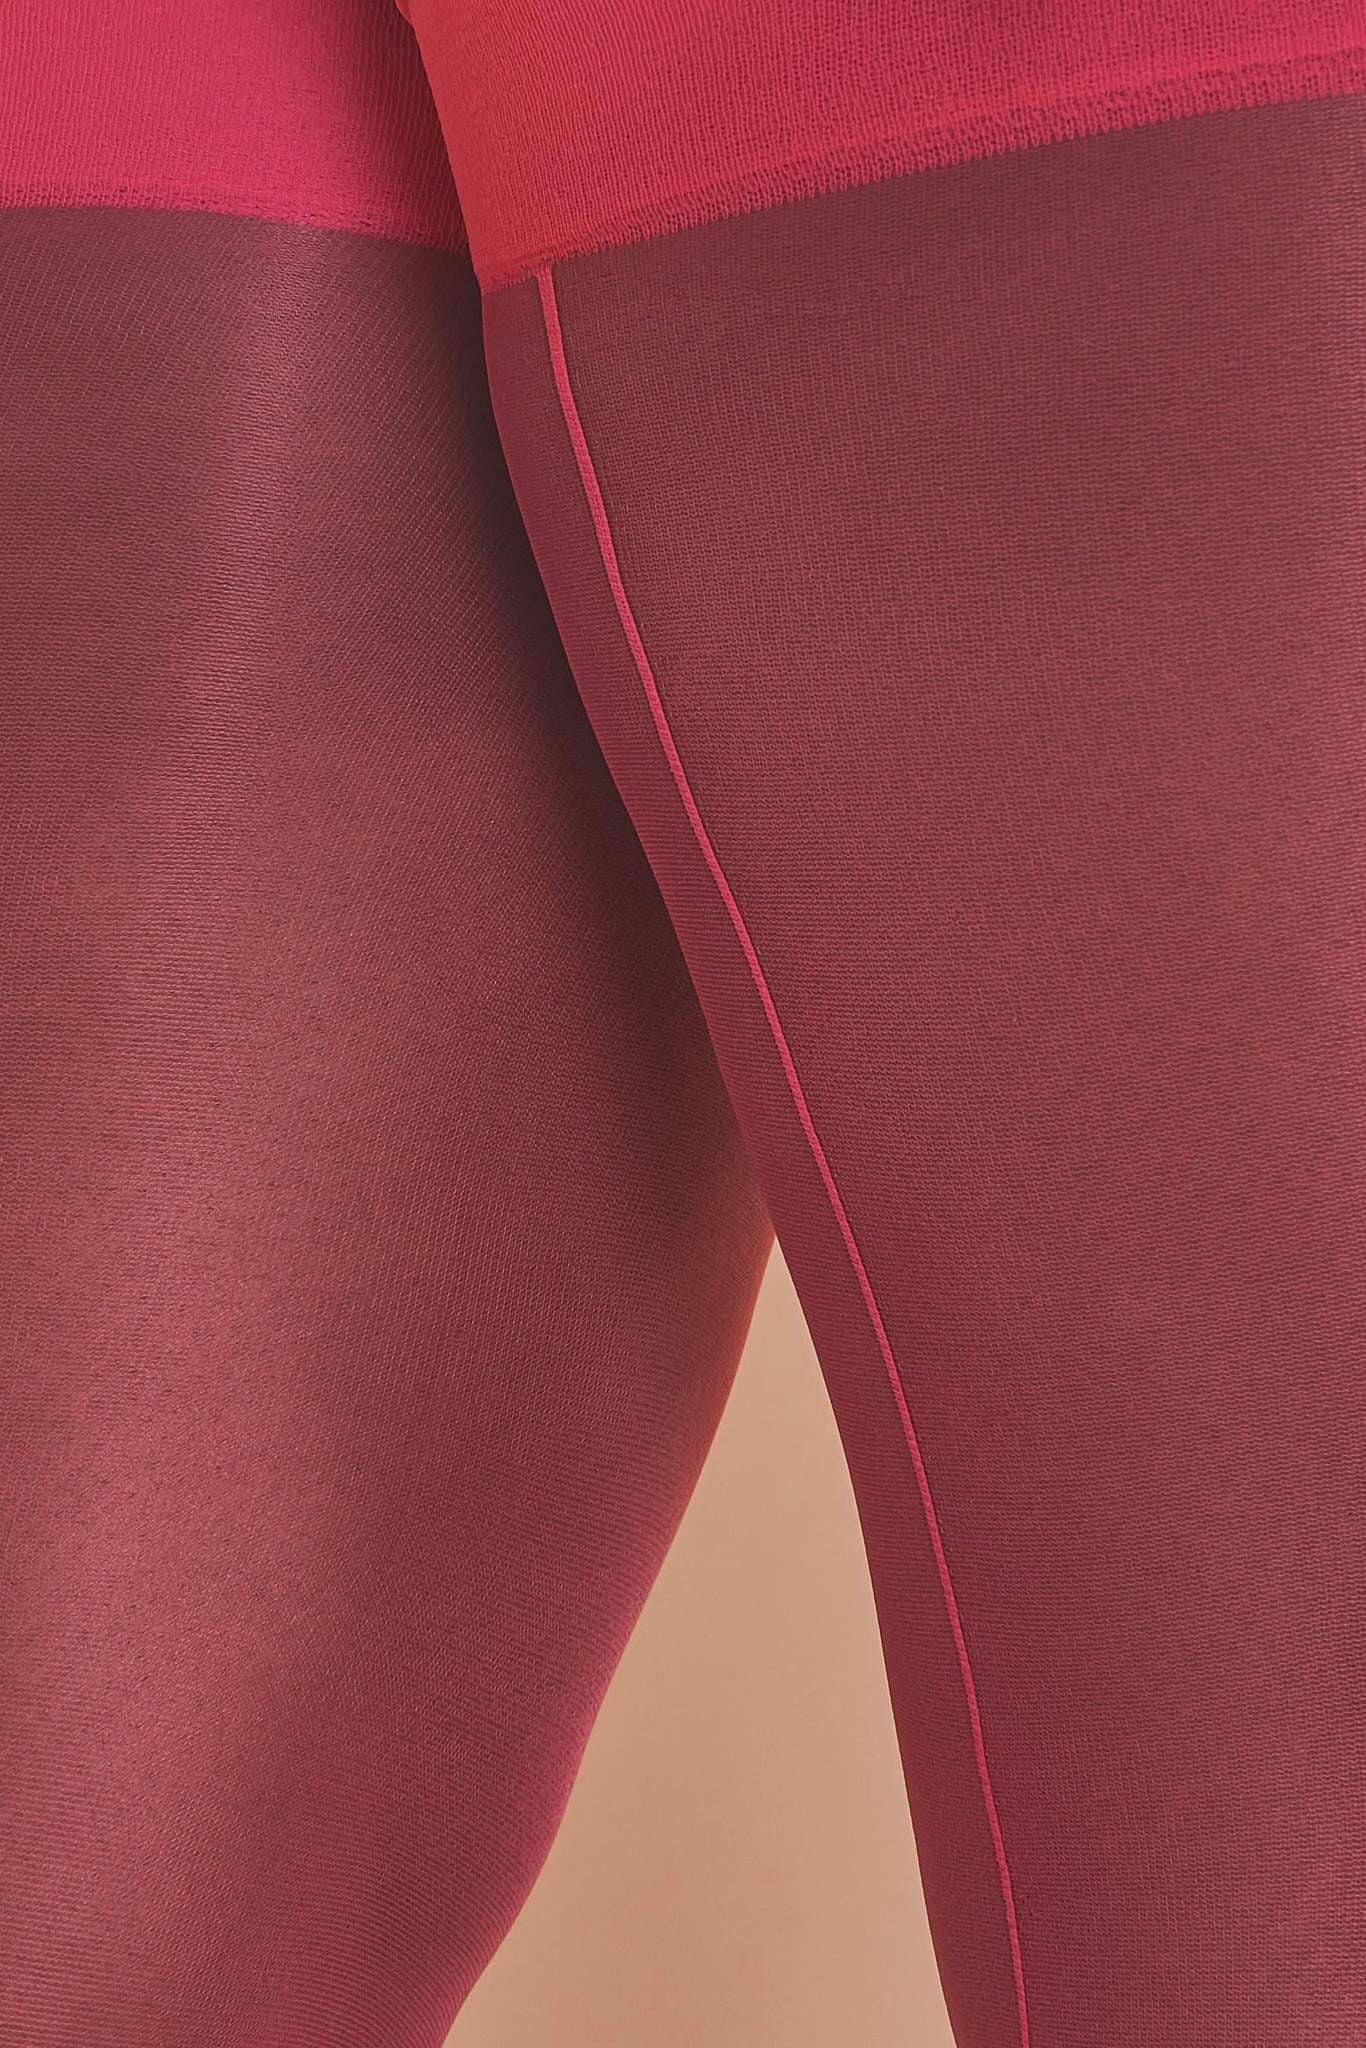 Pink Peacock Seamed Stockings - Sizes 4-18